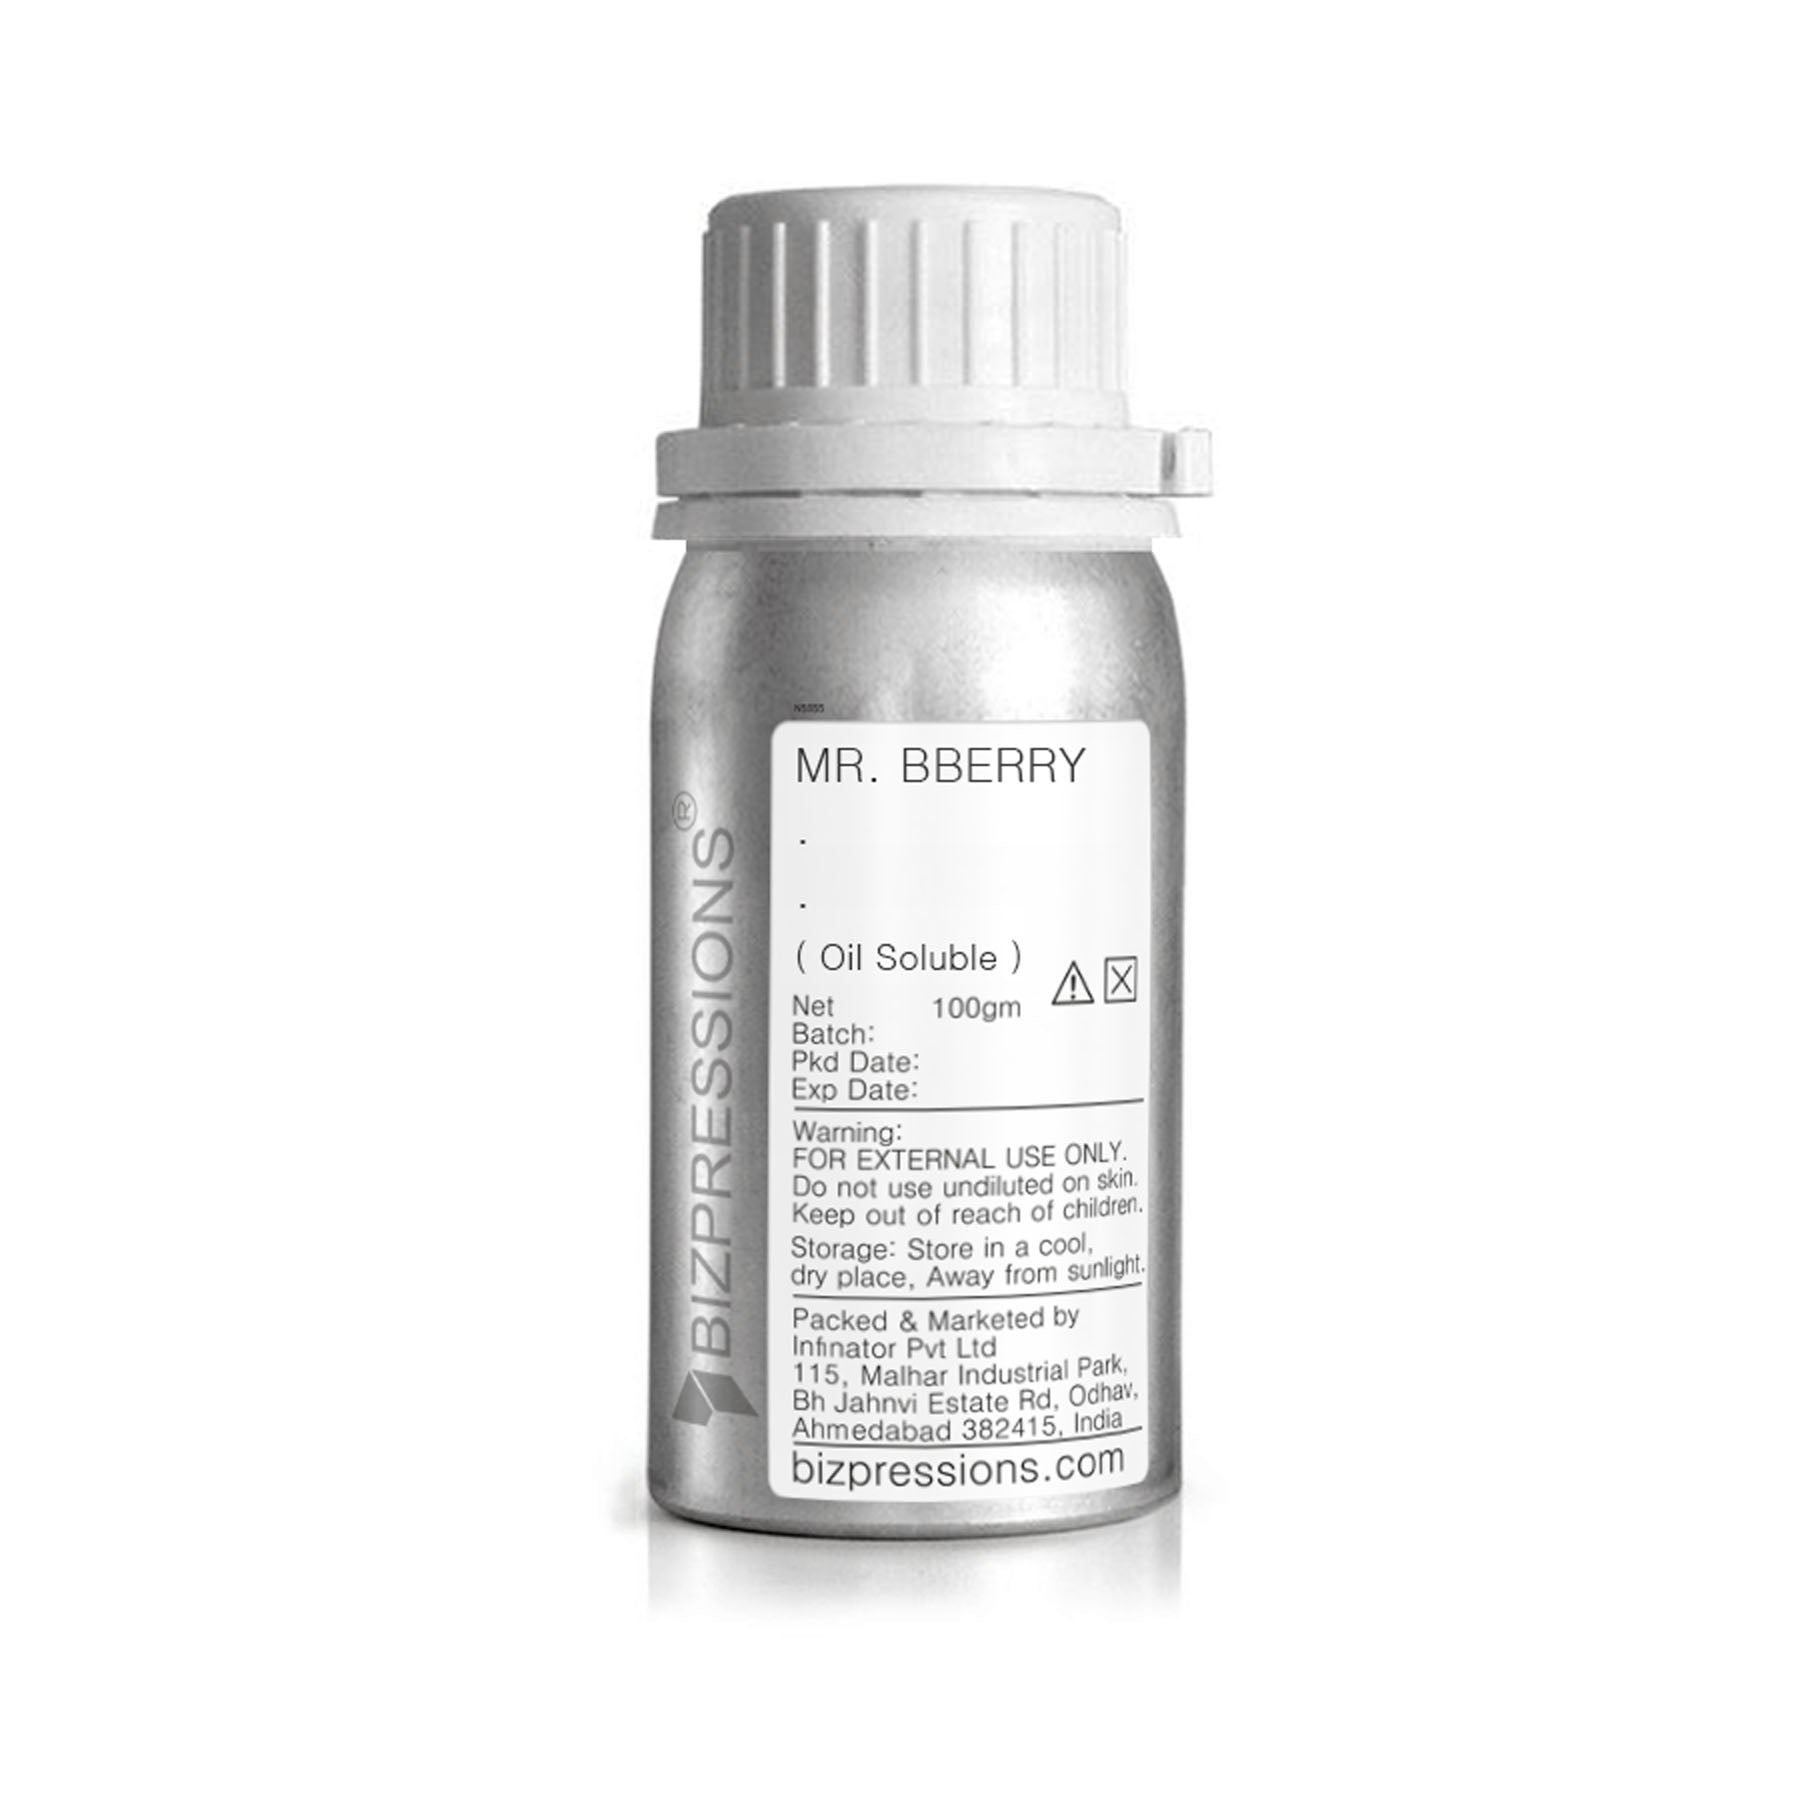 MR. BBERRY - Fragrance ( Oil Soluble ) - 100 gm